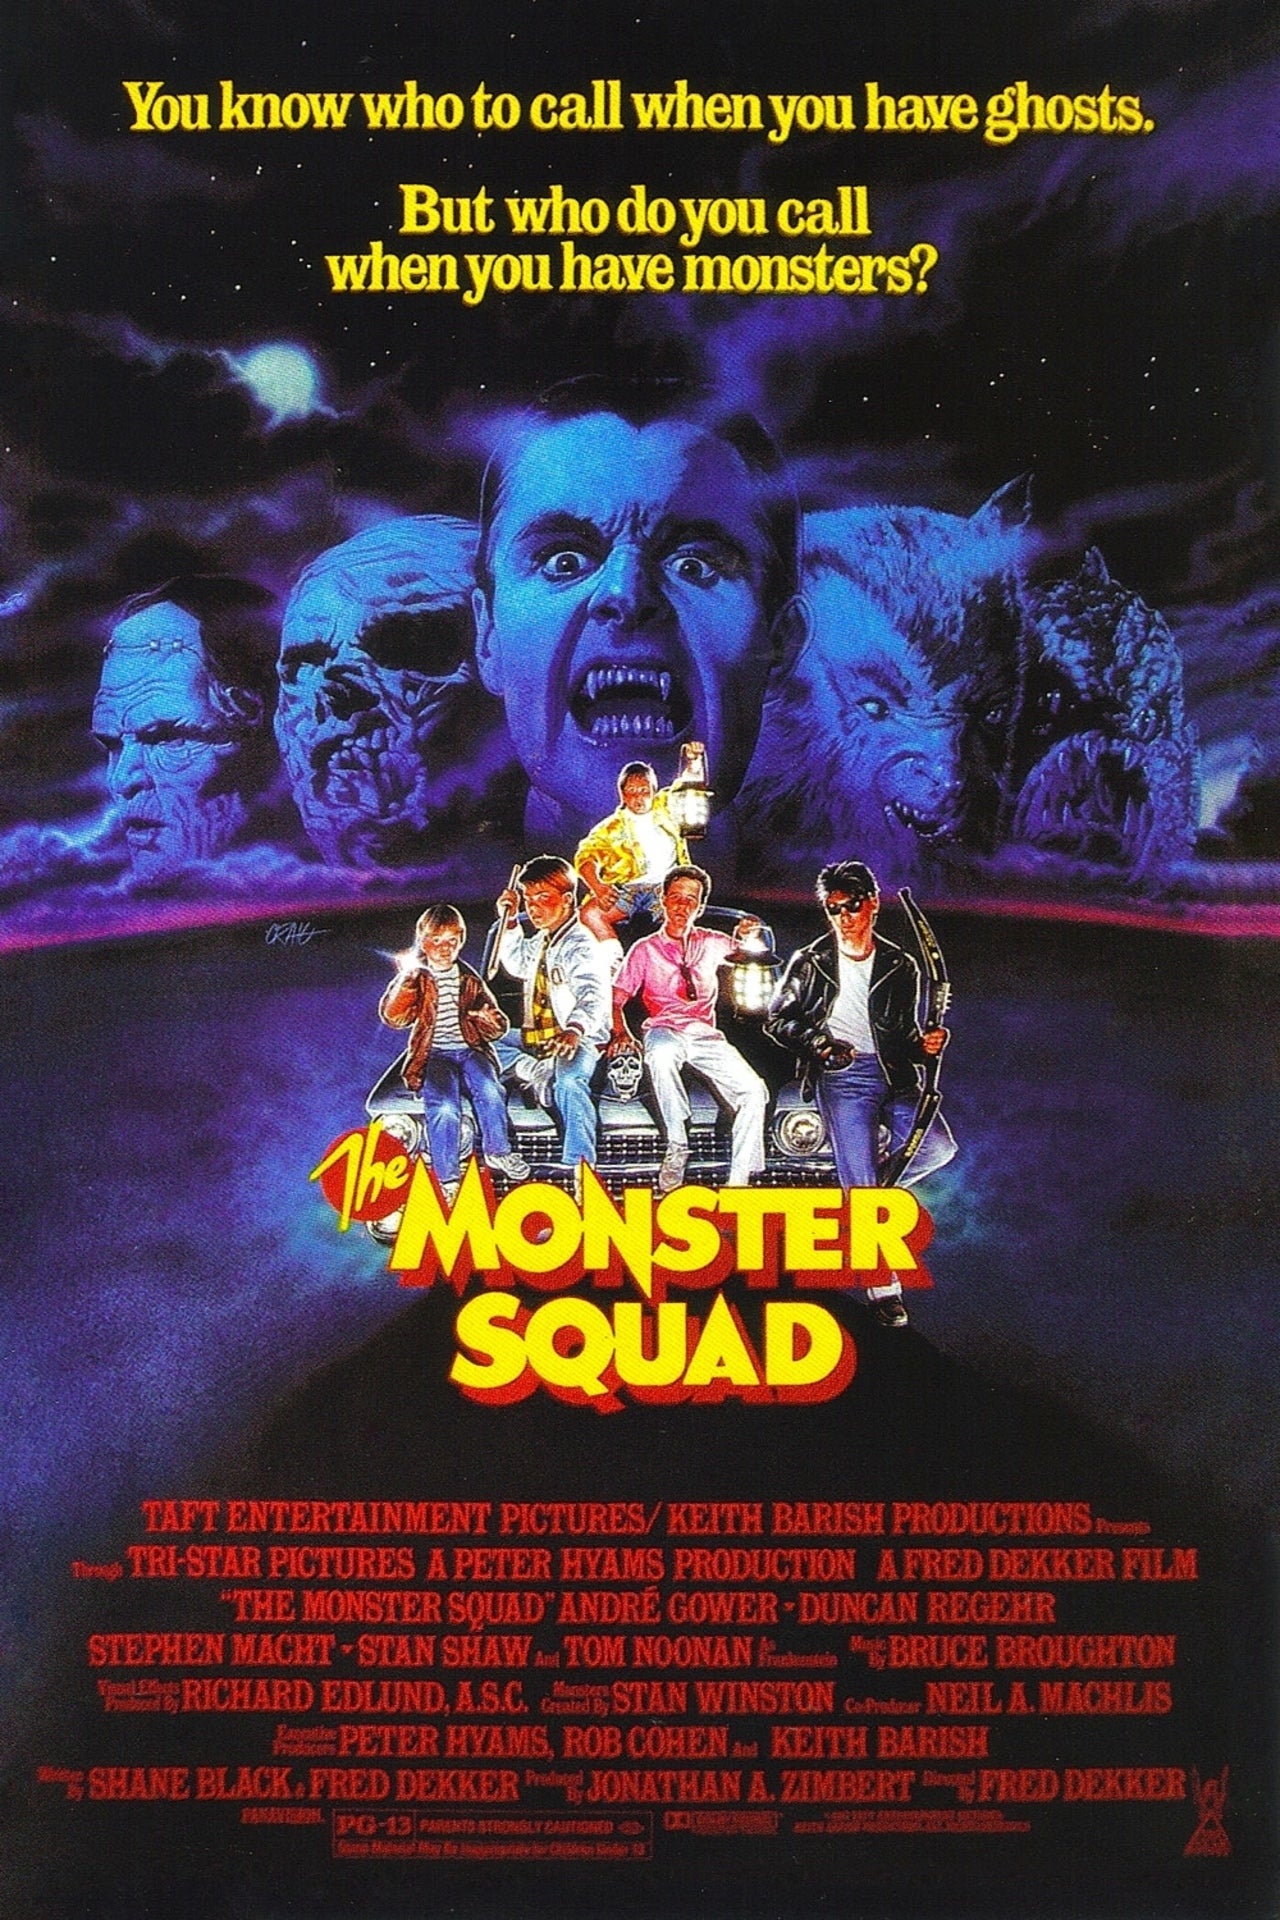 Poster for The Monster Squad (Image: Sony)